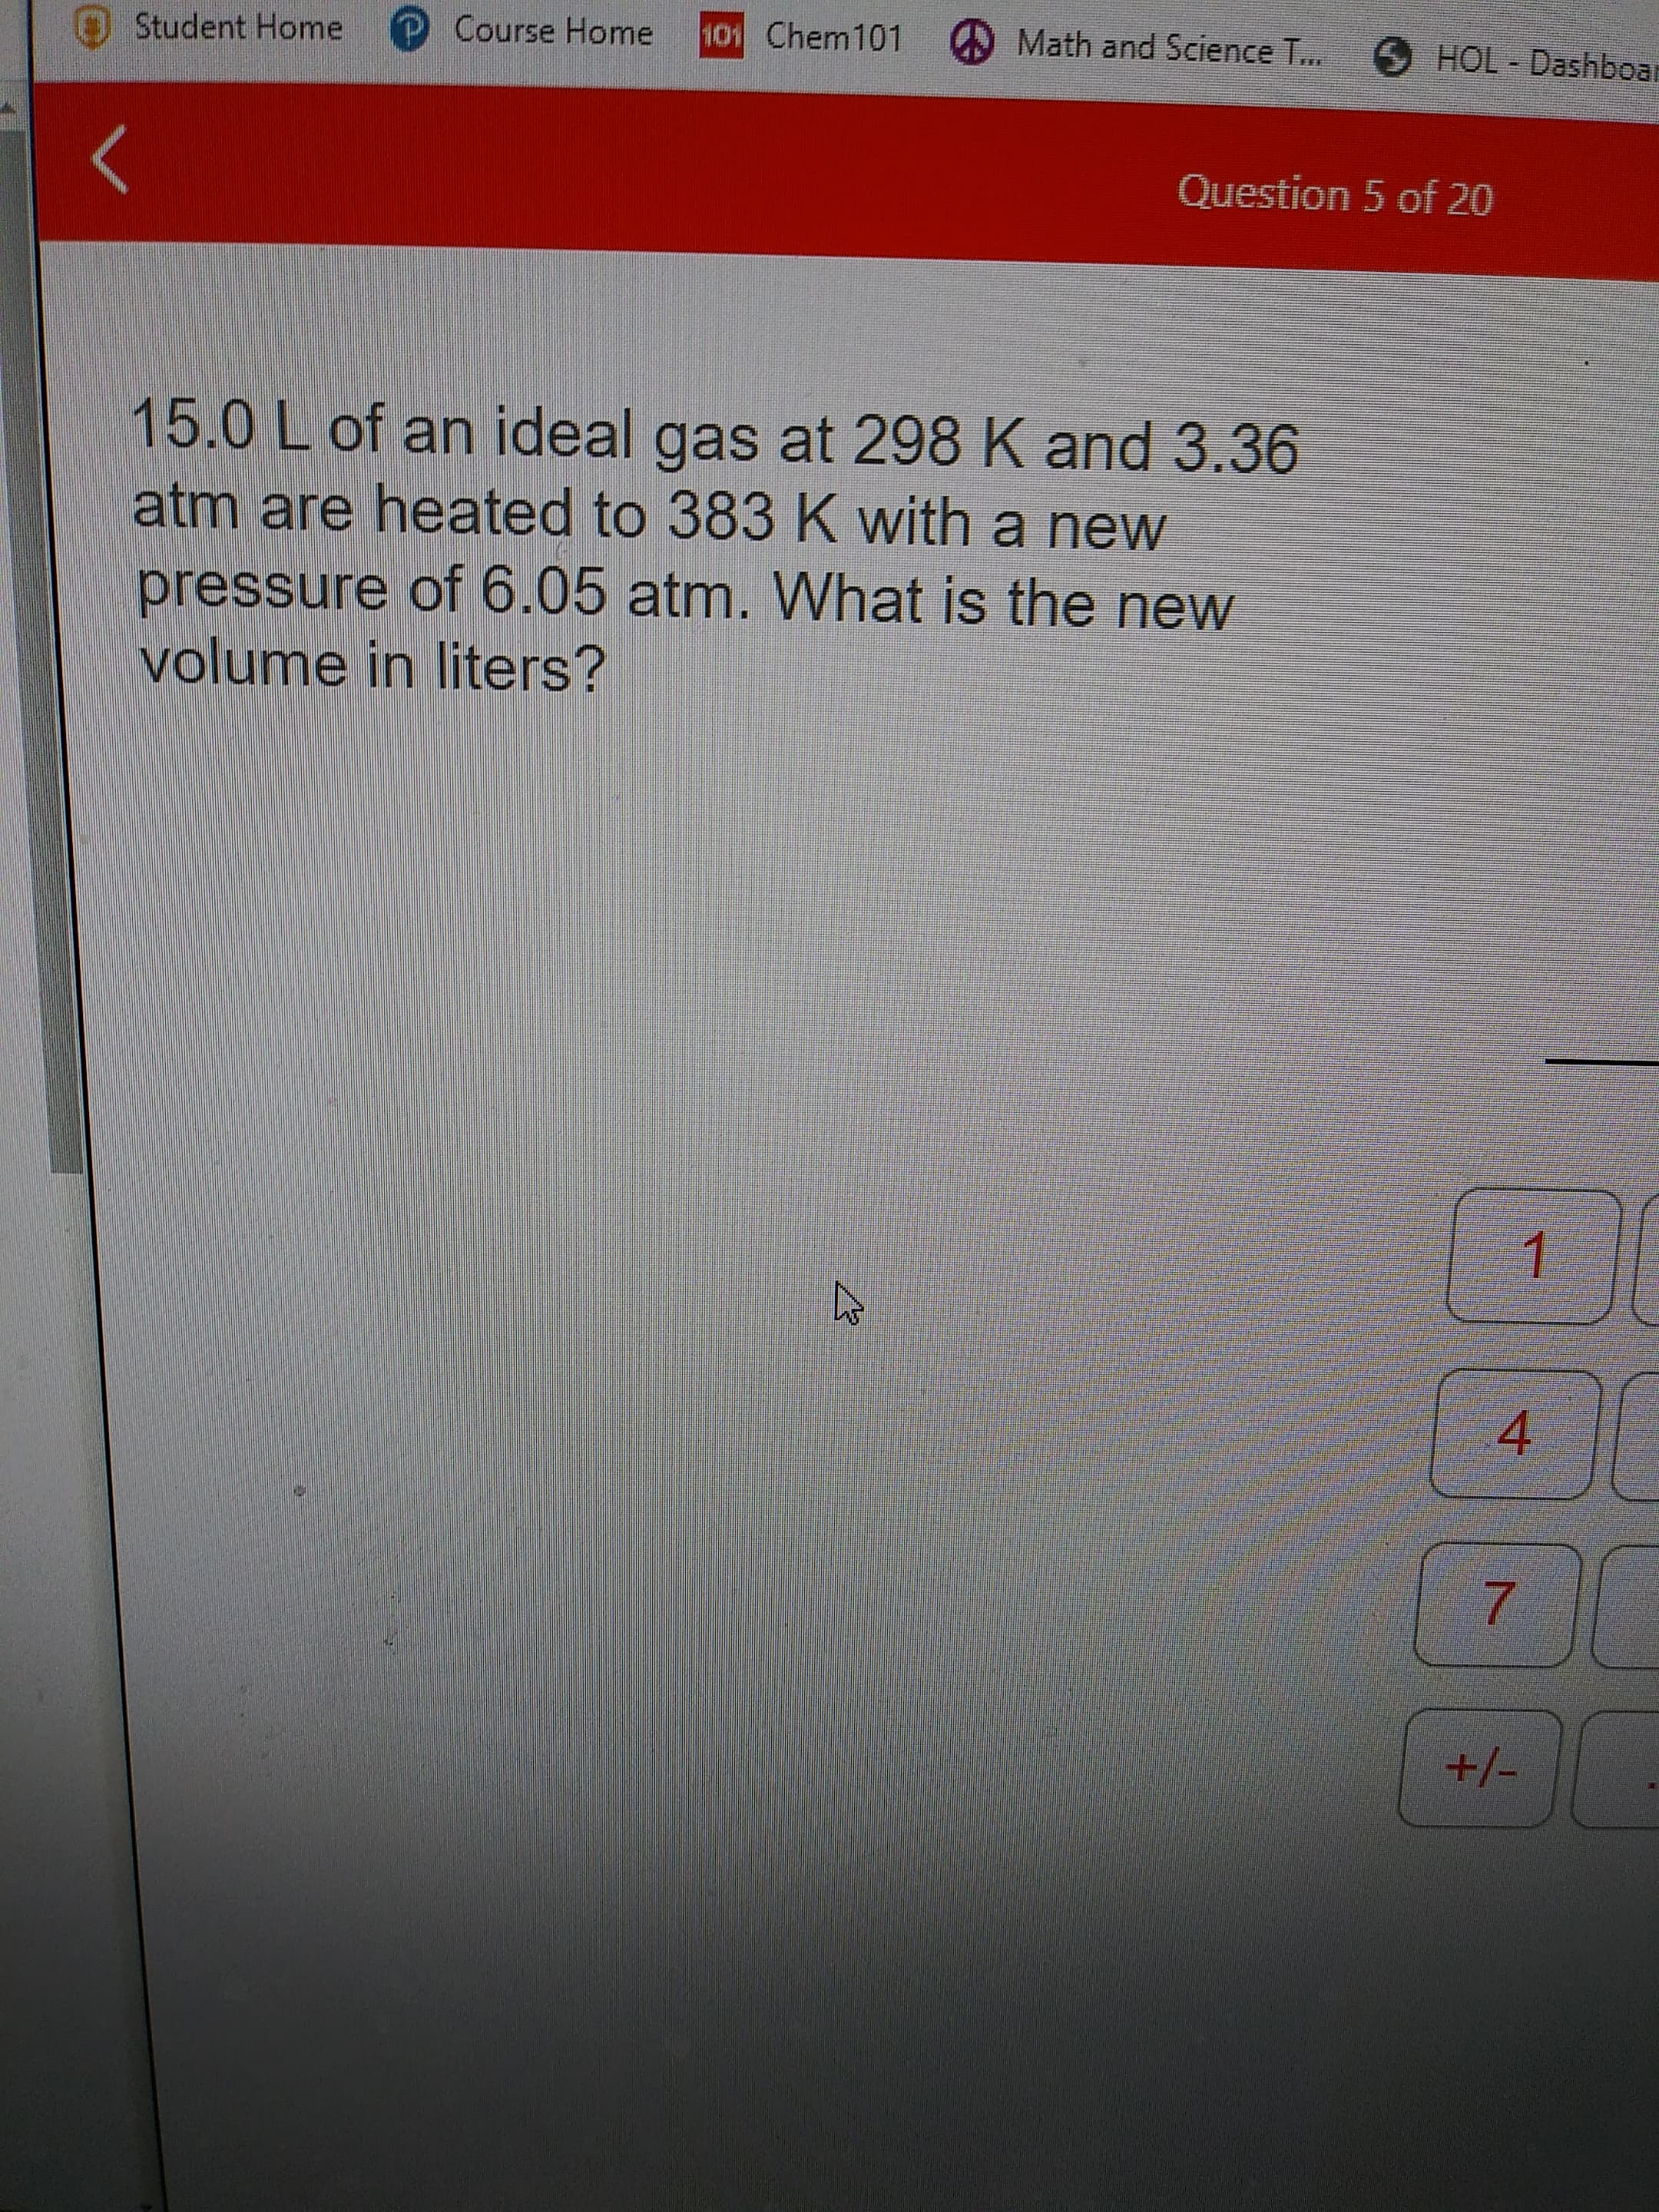 15.0 L of an ideal gas at 298 K and 3.3E
atm are heated to 383 K with a new
pressure of 605 ntra
